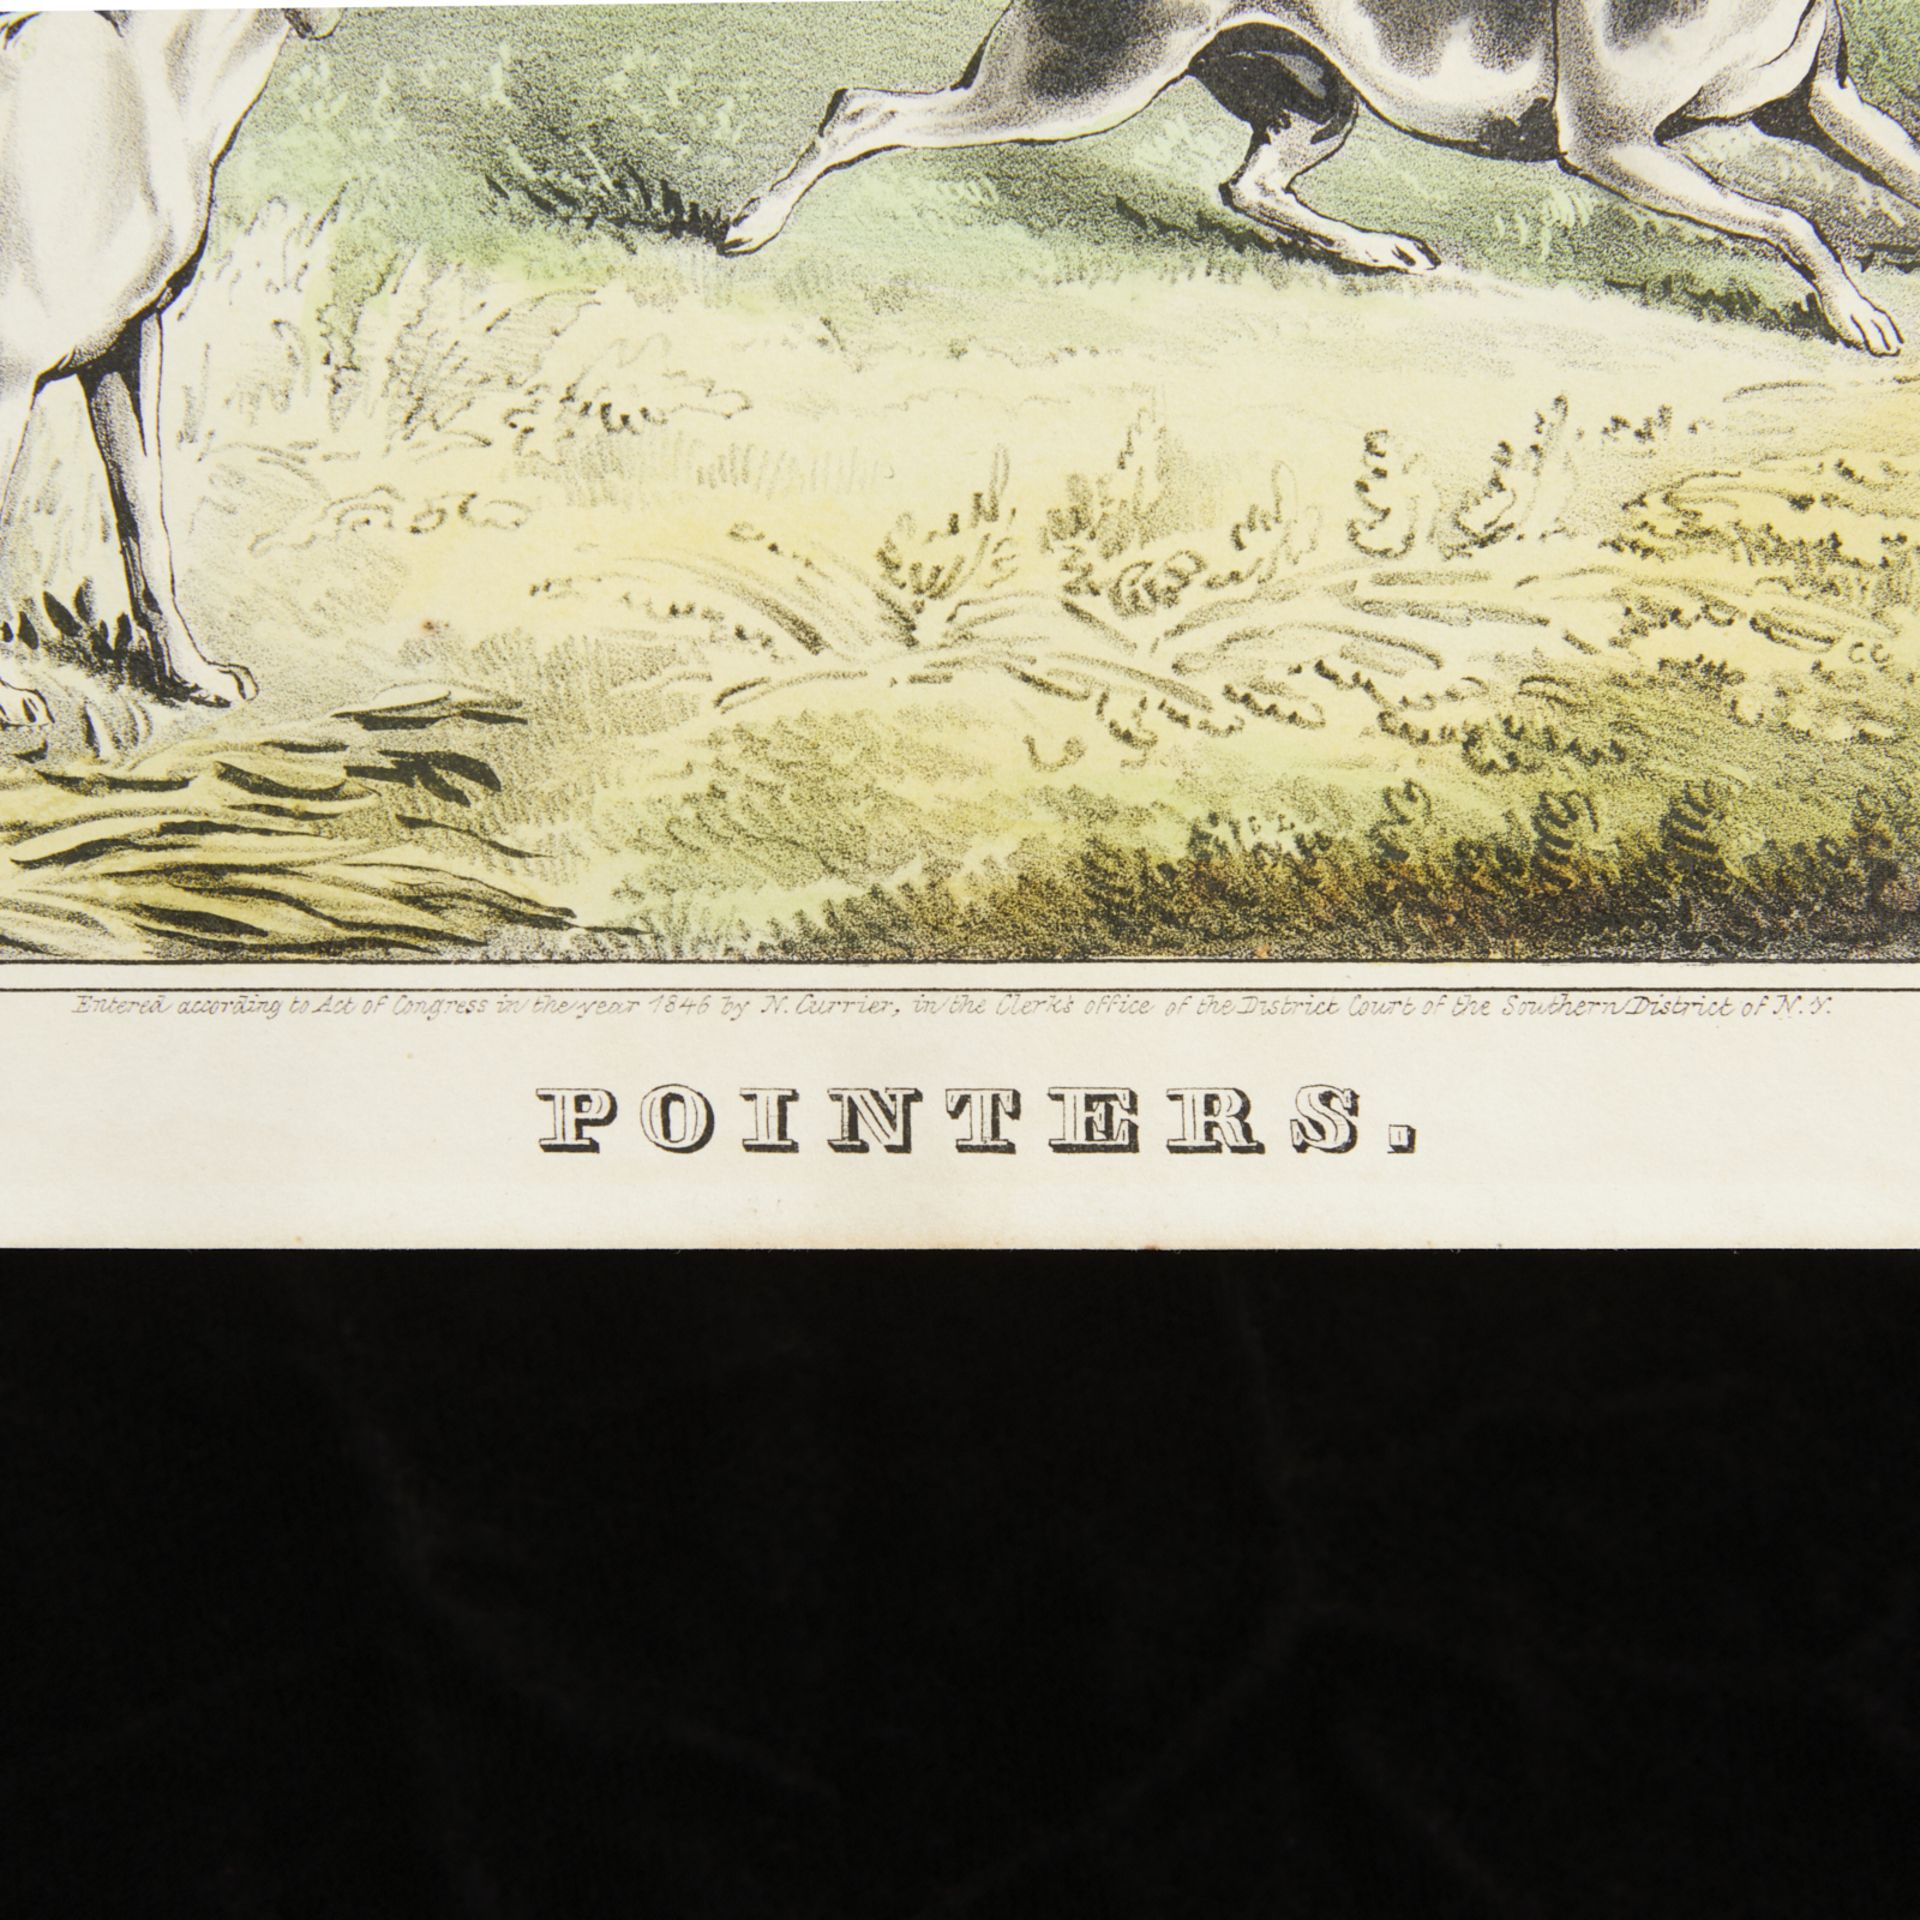 Currier & Ives "Pointers" Print 1846 - Image 2 of 8